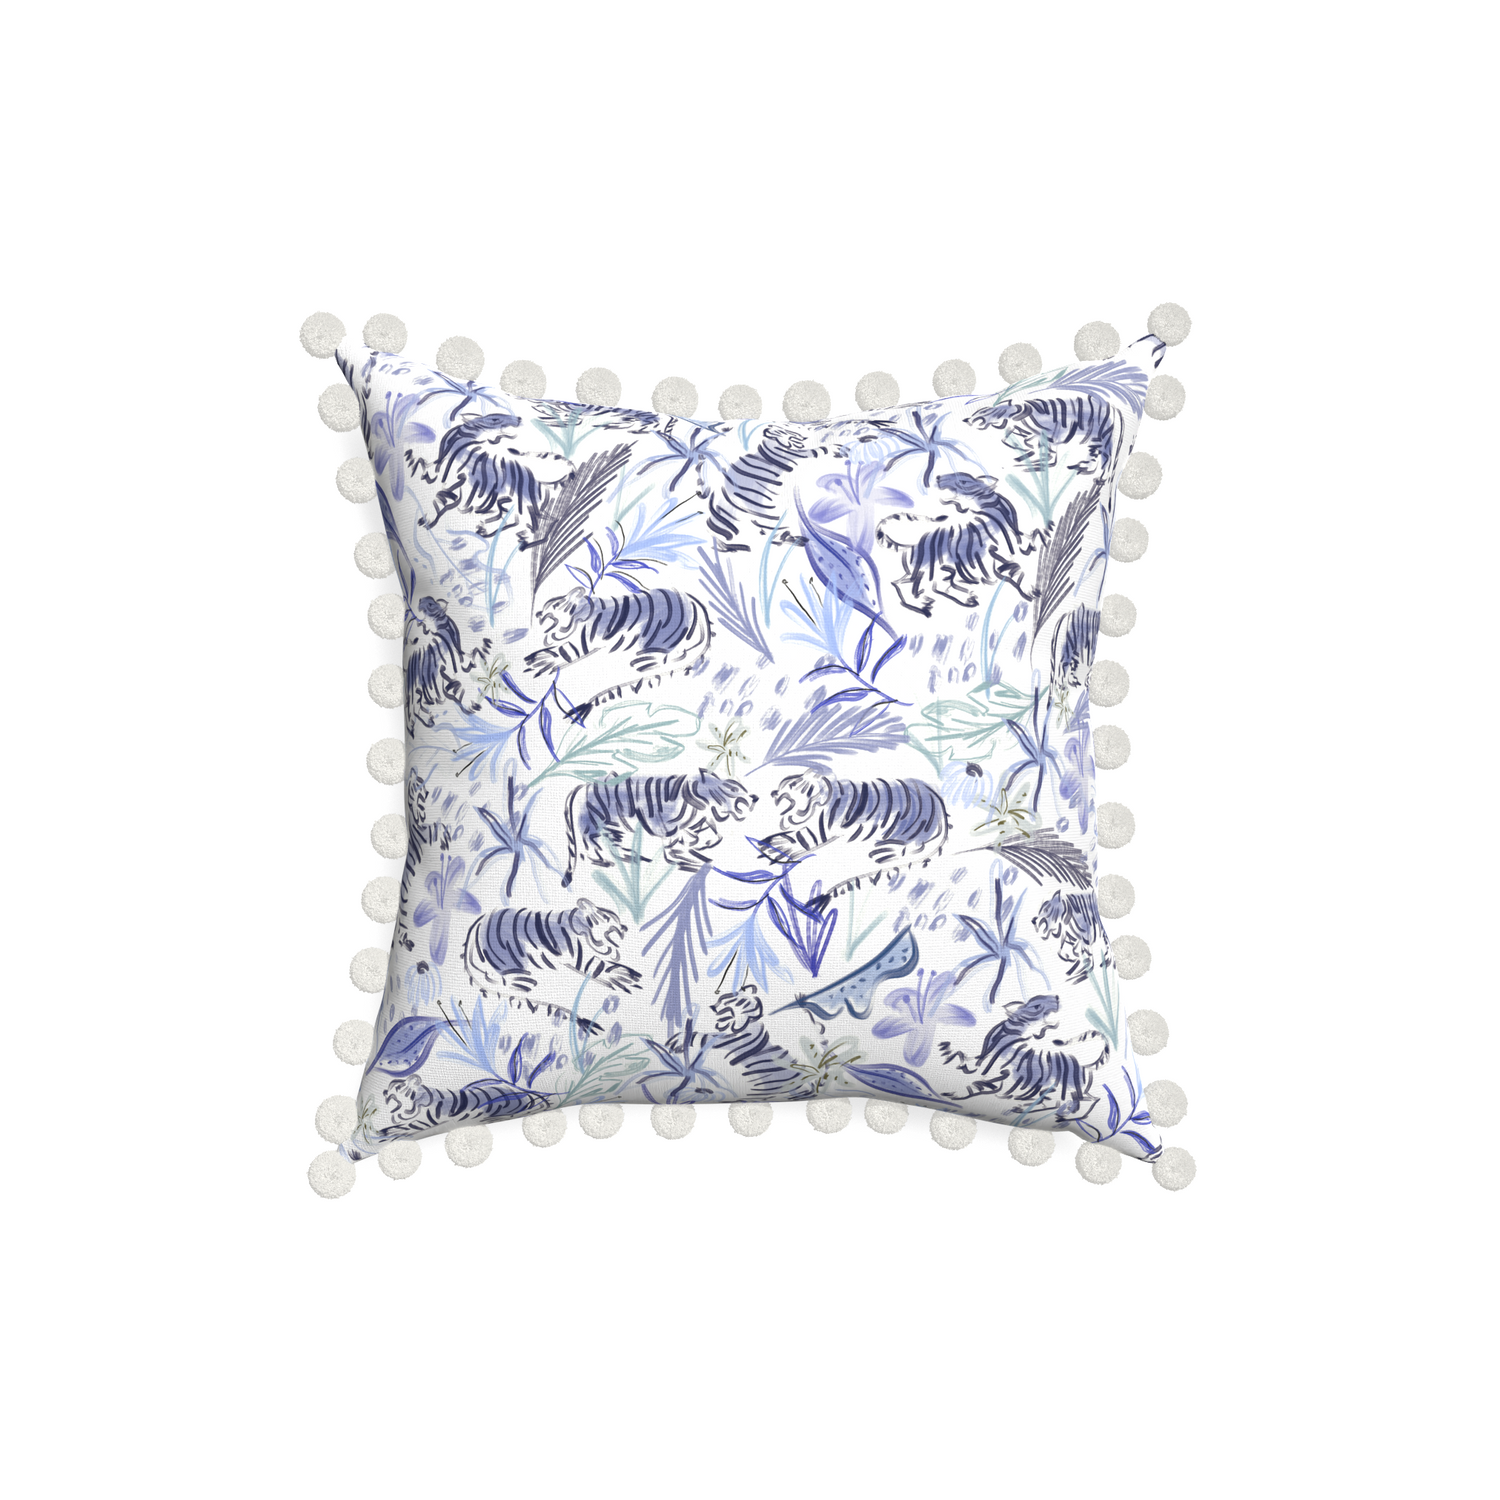 18-square frida blue custom blue with intricate tiger designpillow with snow pom pom on white background